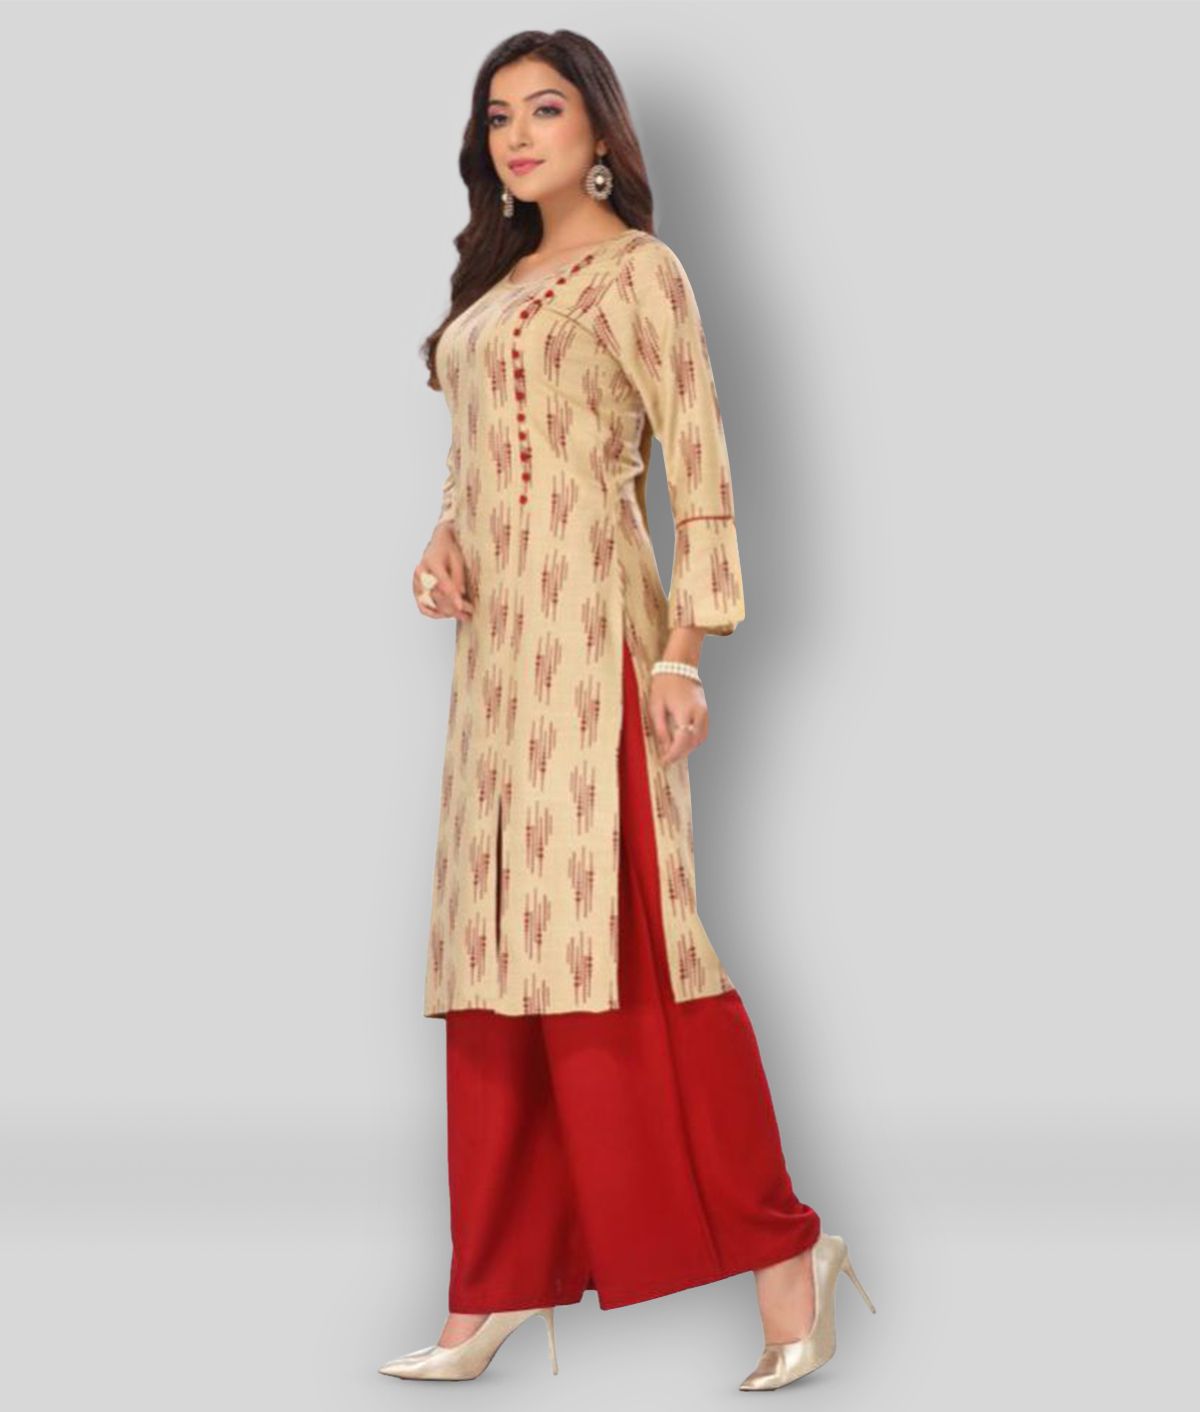     			haya fashion - Beige Straight Rayon Women's Stitched Salwar Suit ( Pack of 1 )